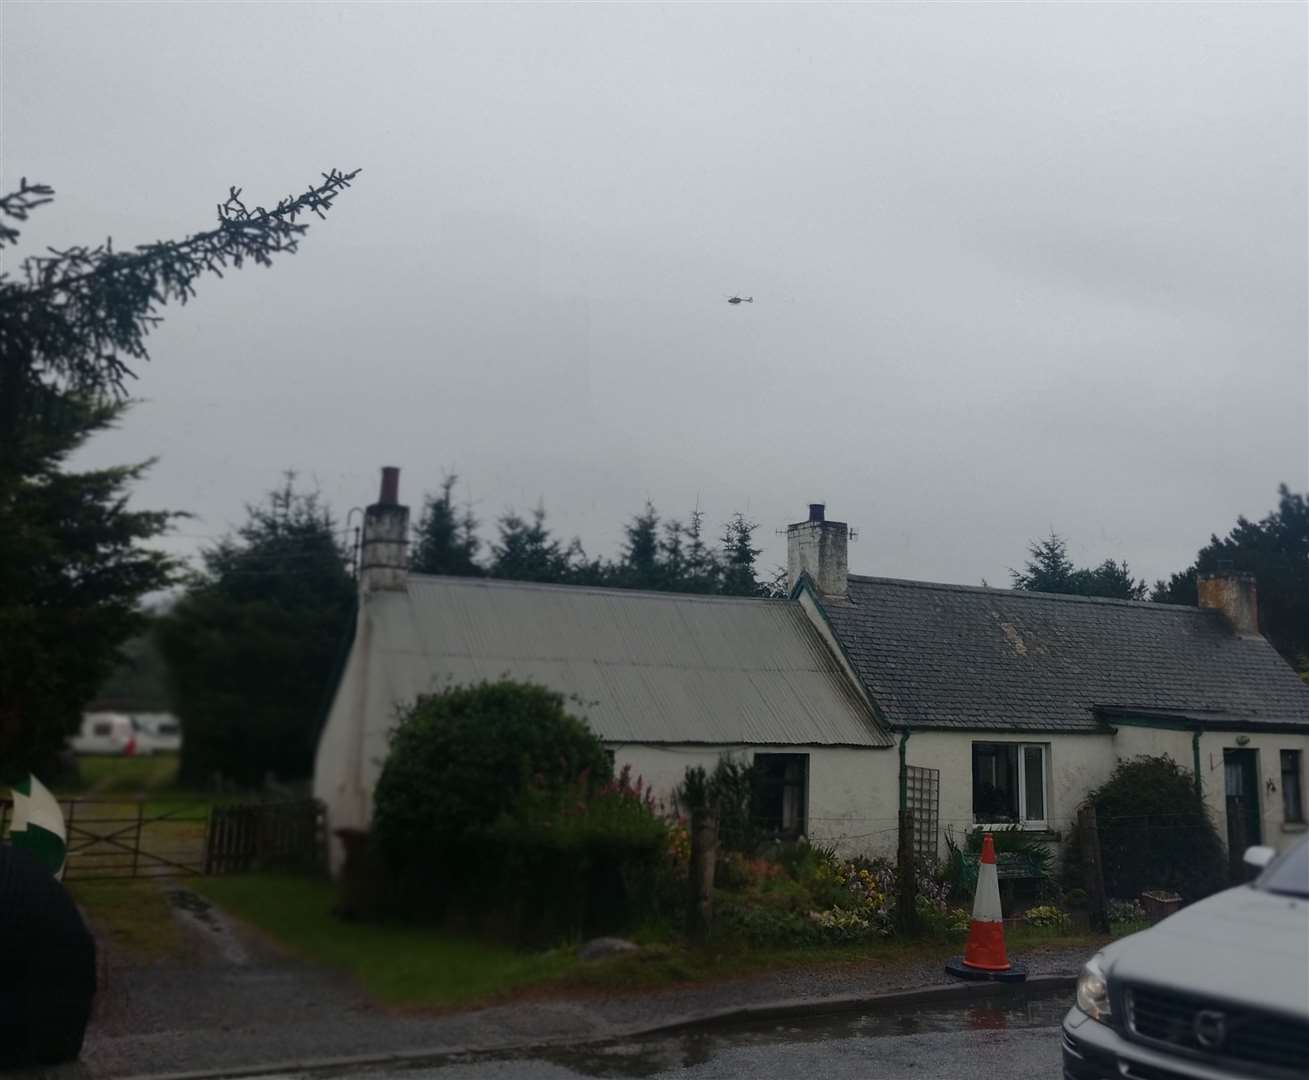 The air ambulance finally took off over Newtonmore at around 3.45pm.